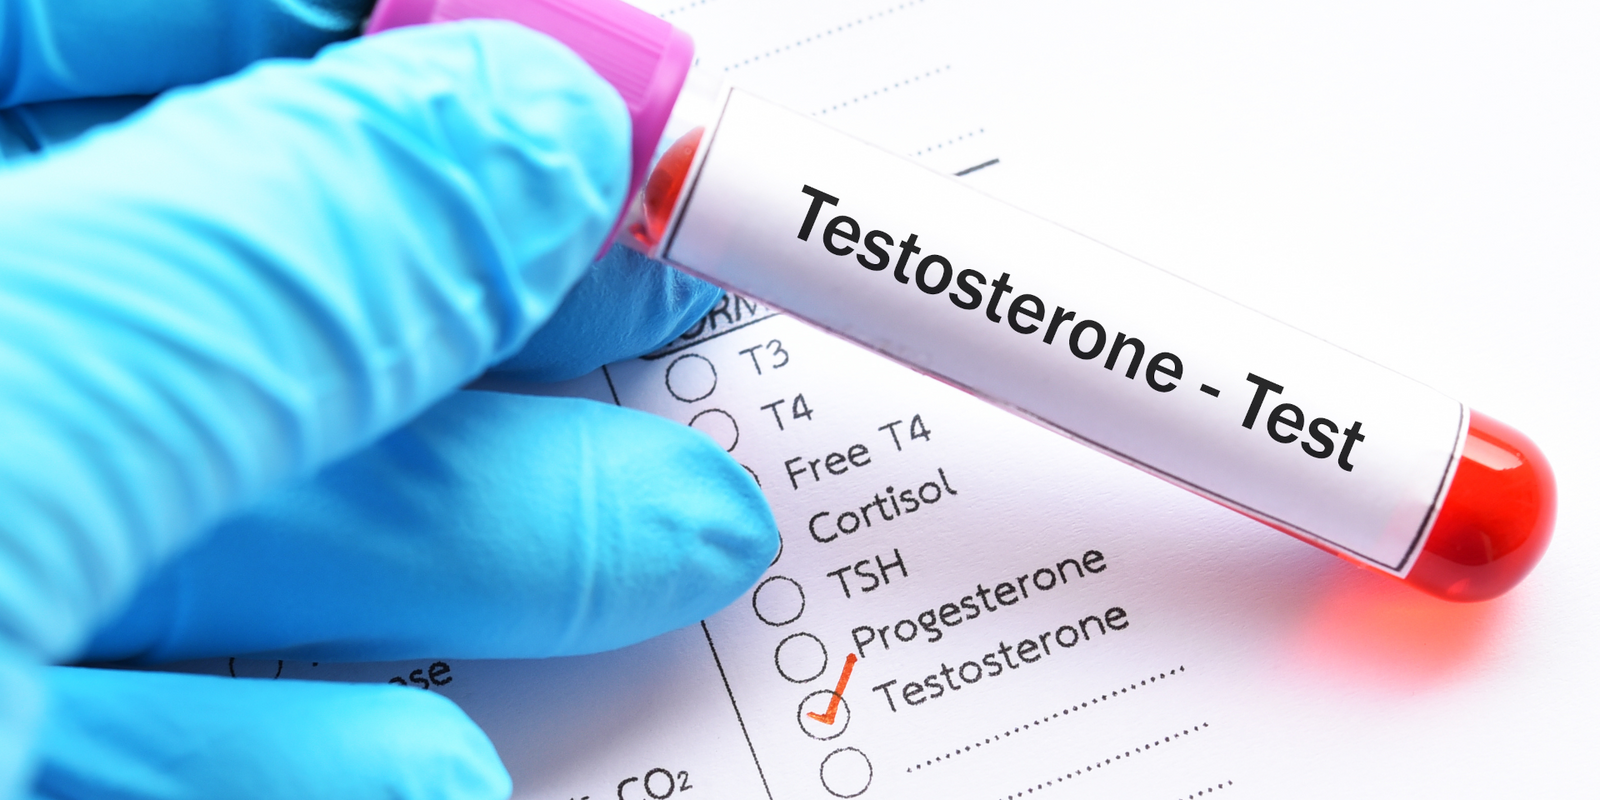 What To Look For In a Testosterone Booster: An Essential Checklist